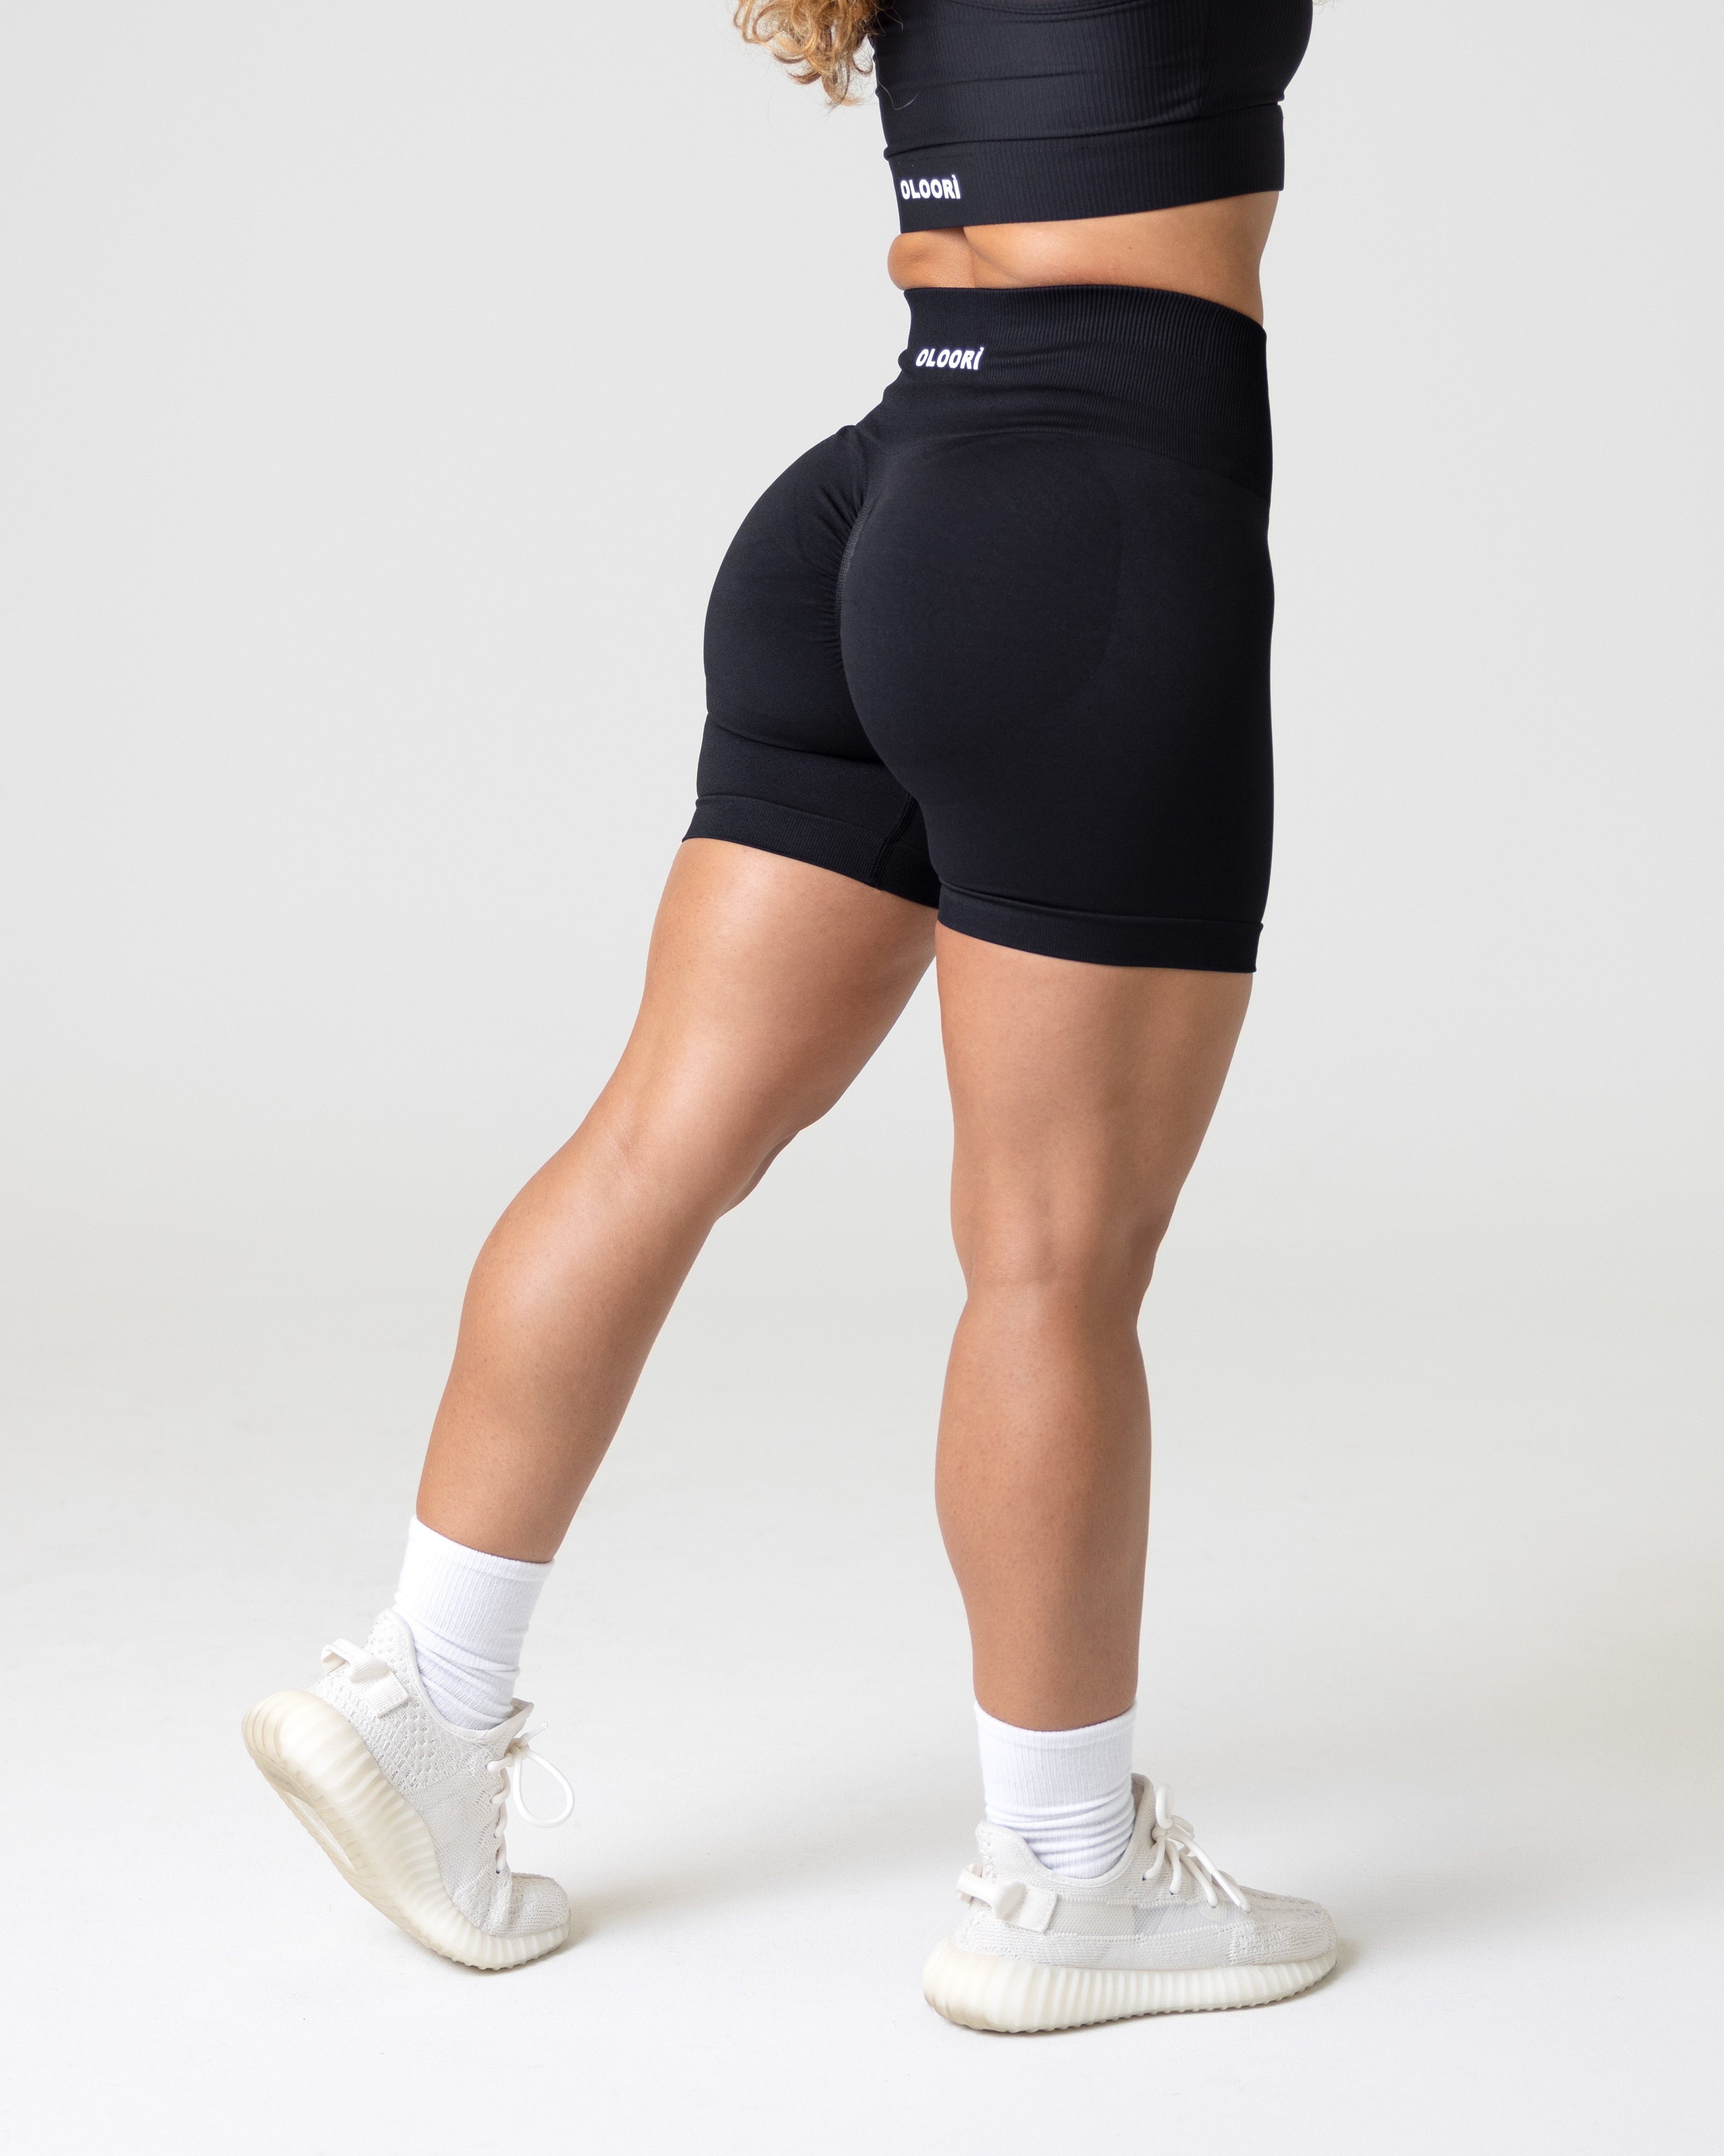 YEOREO Buttery Workout Shorts for Women High Waist Running Biker Shorts  Spandex Scrunch Gym Yoga Shorts Black S at  Women's Clothing store